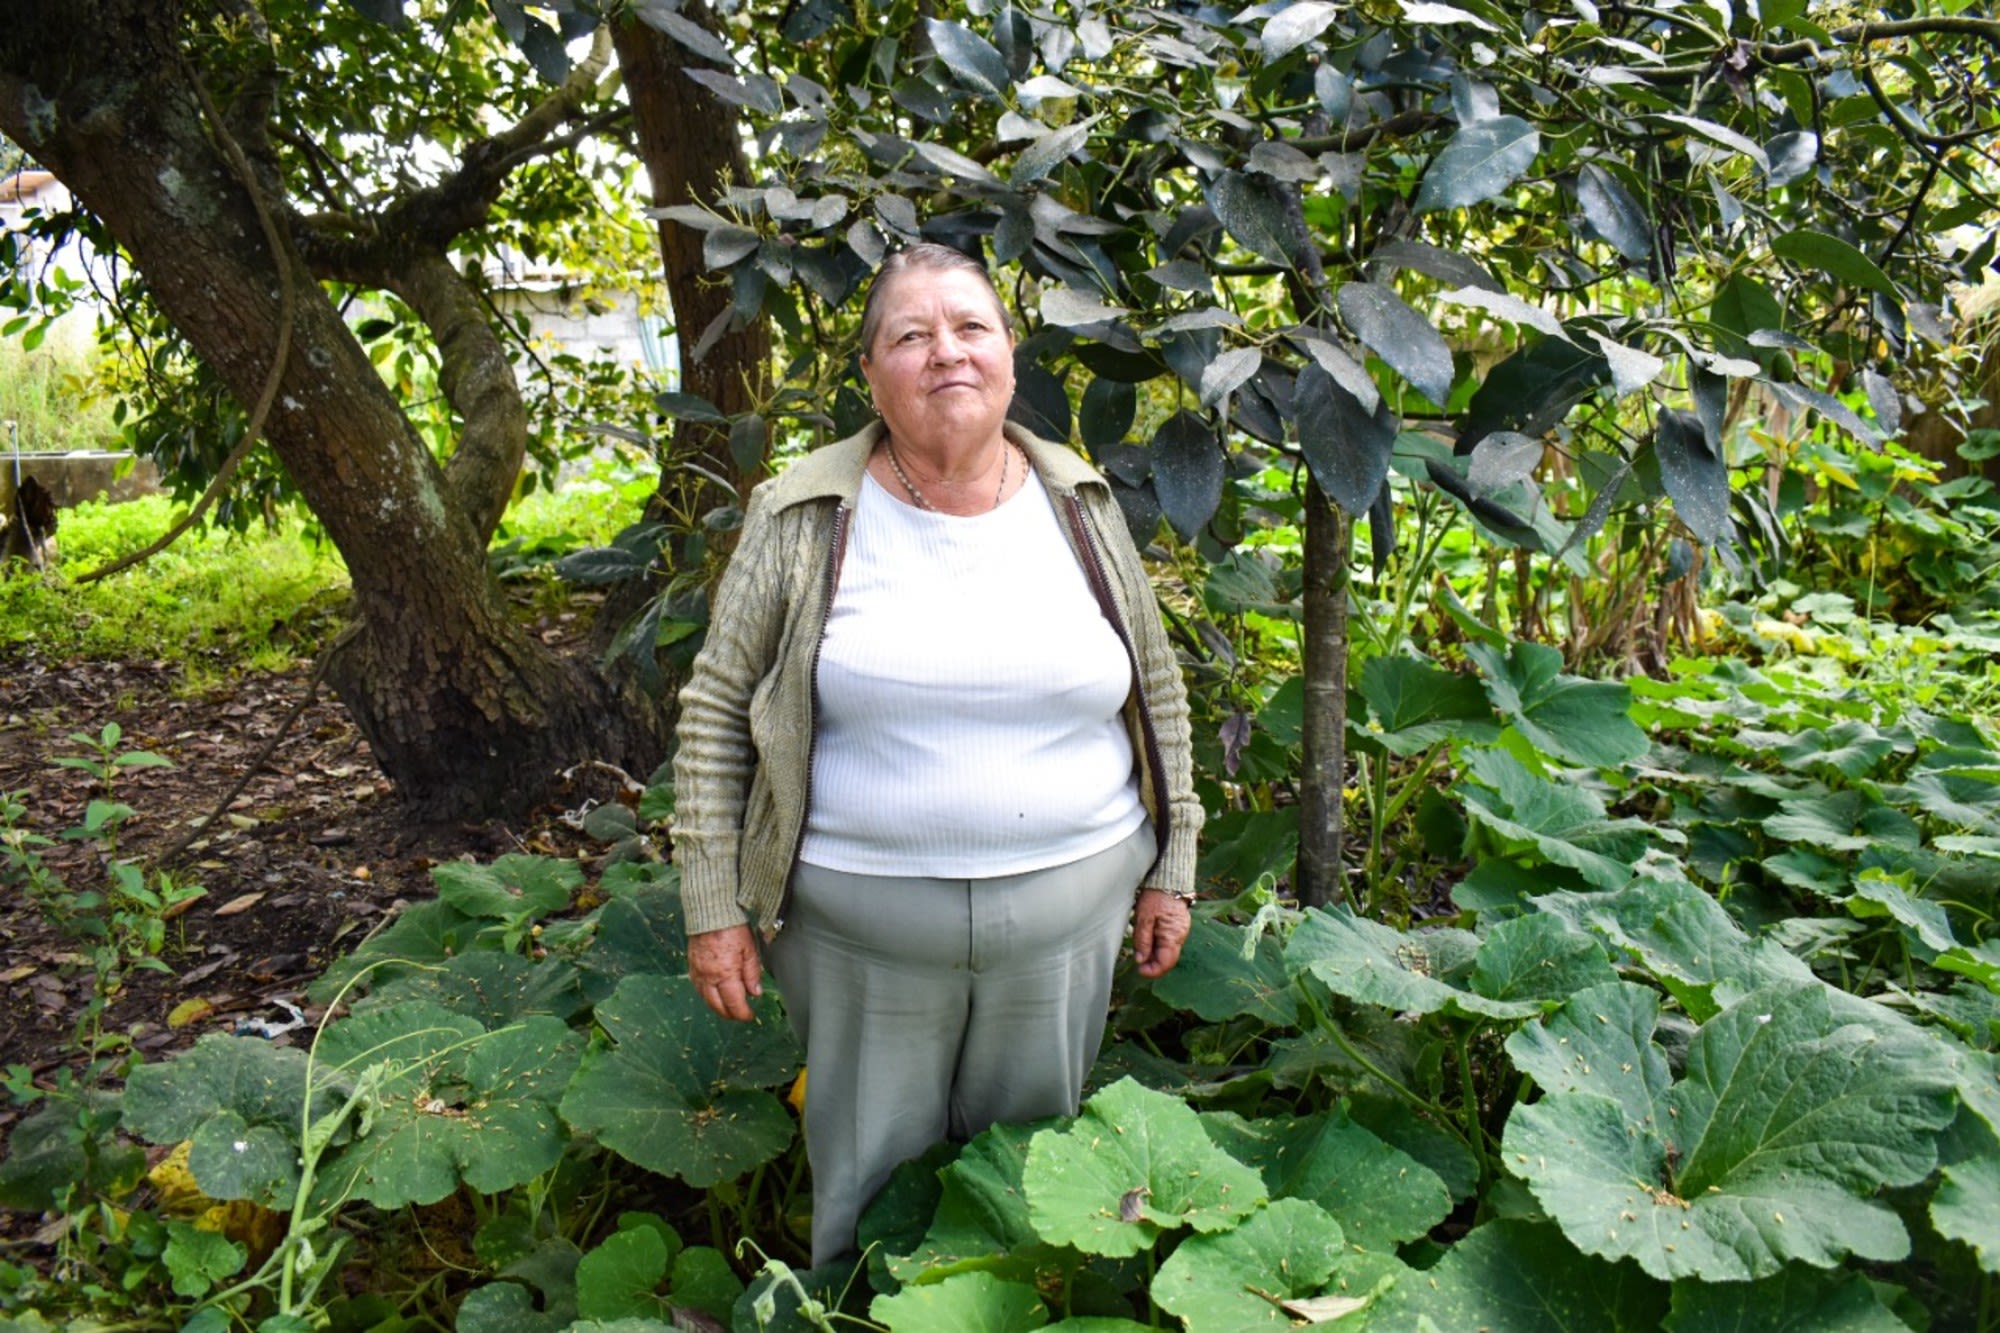 A Kiva loan to Rosa helped to buy avocado plants in order to increase sales in her business.
